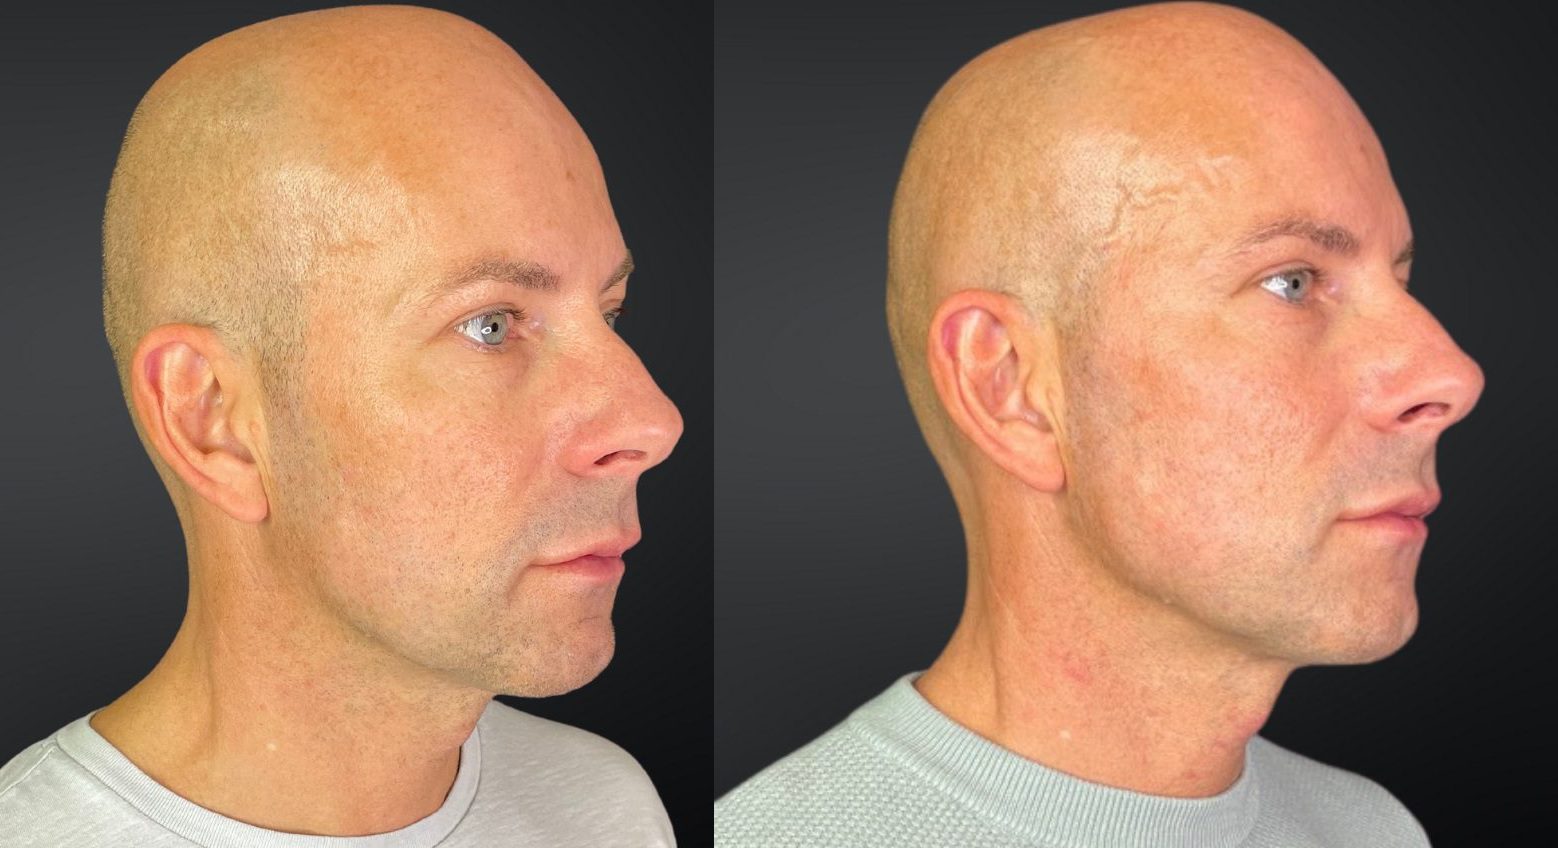 Fillers lower face before and after